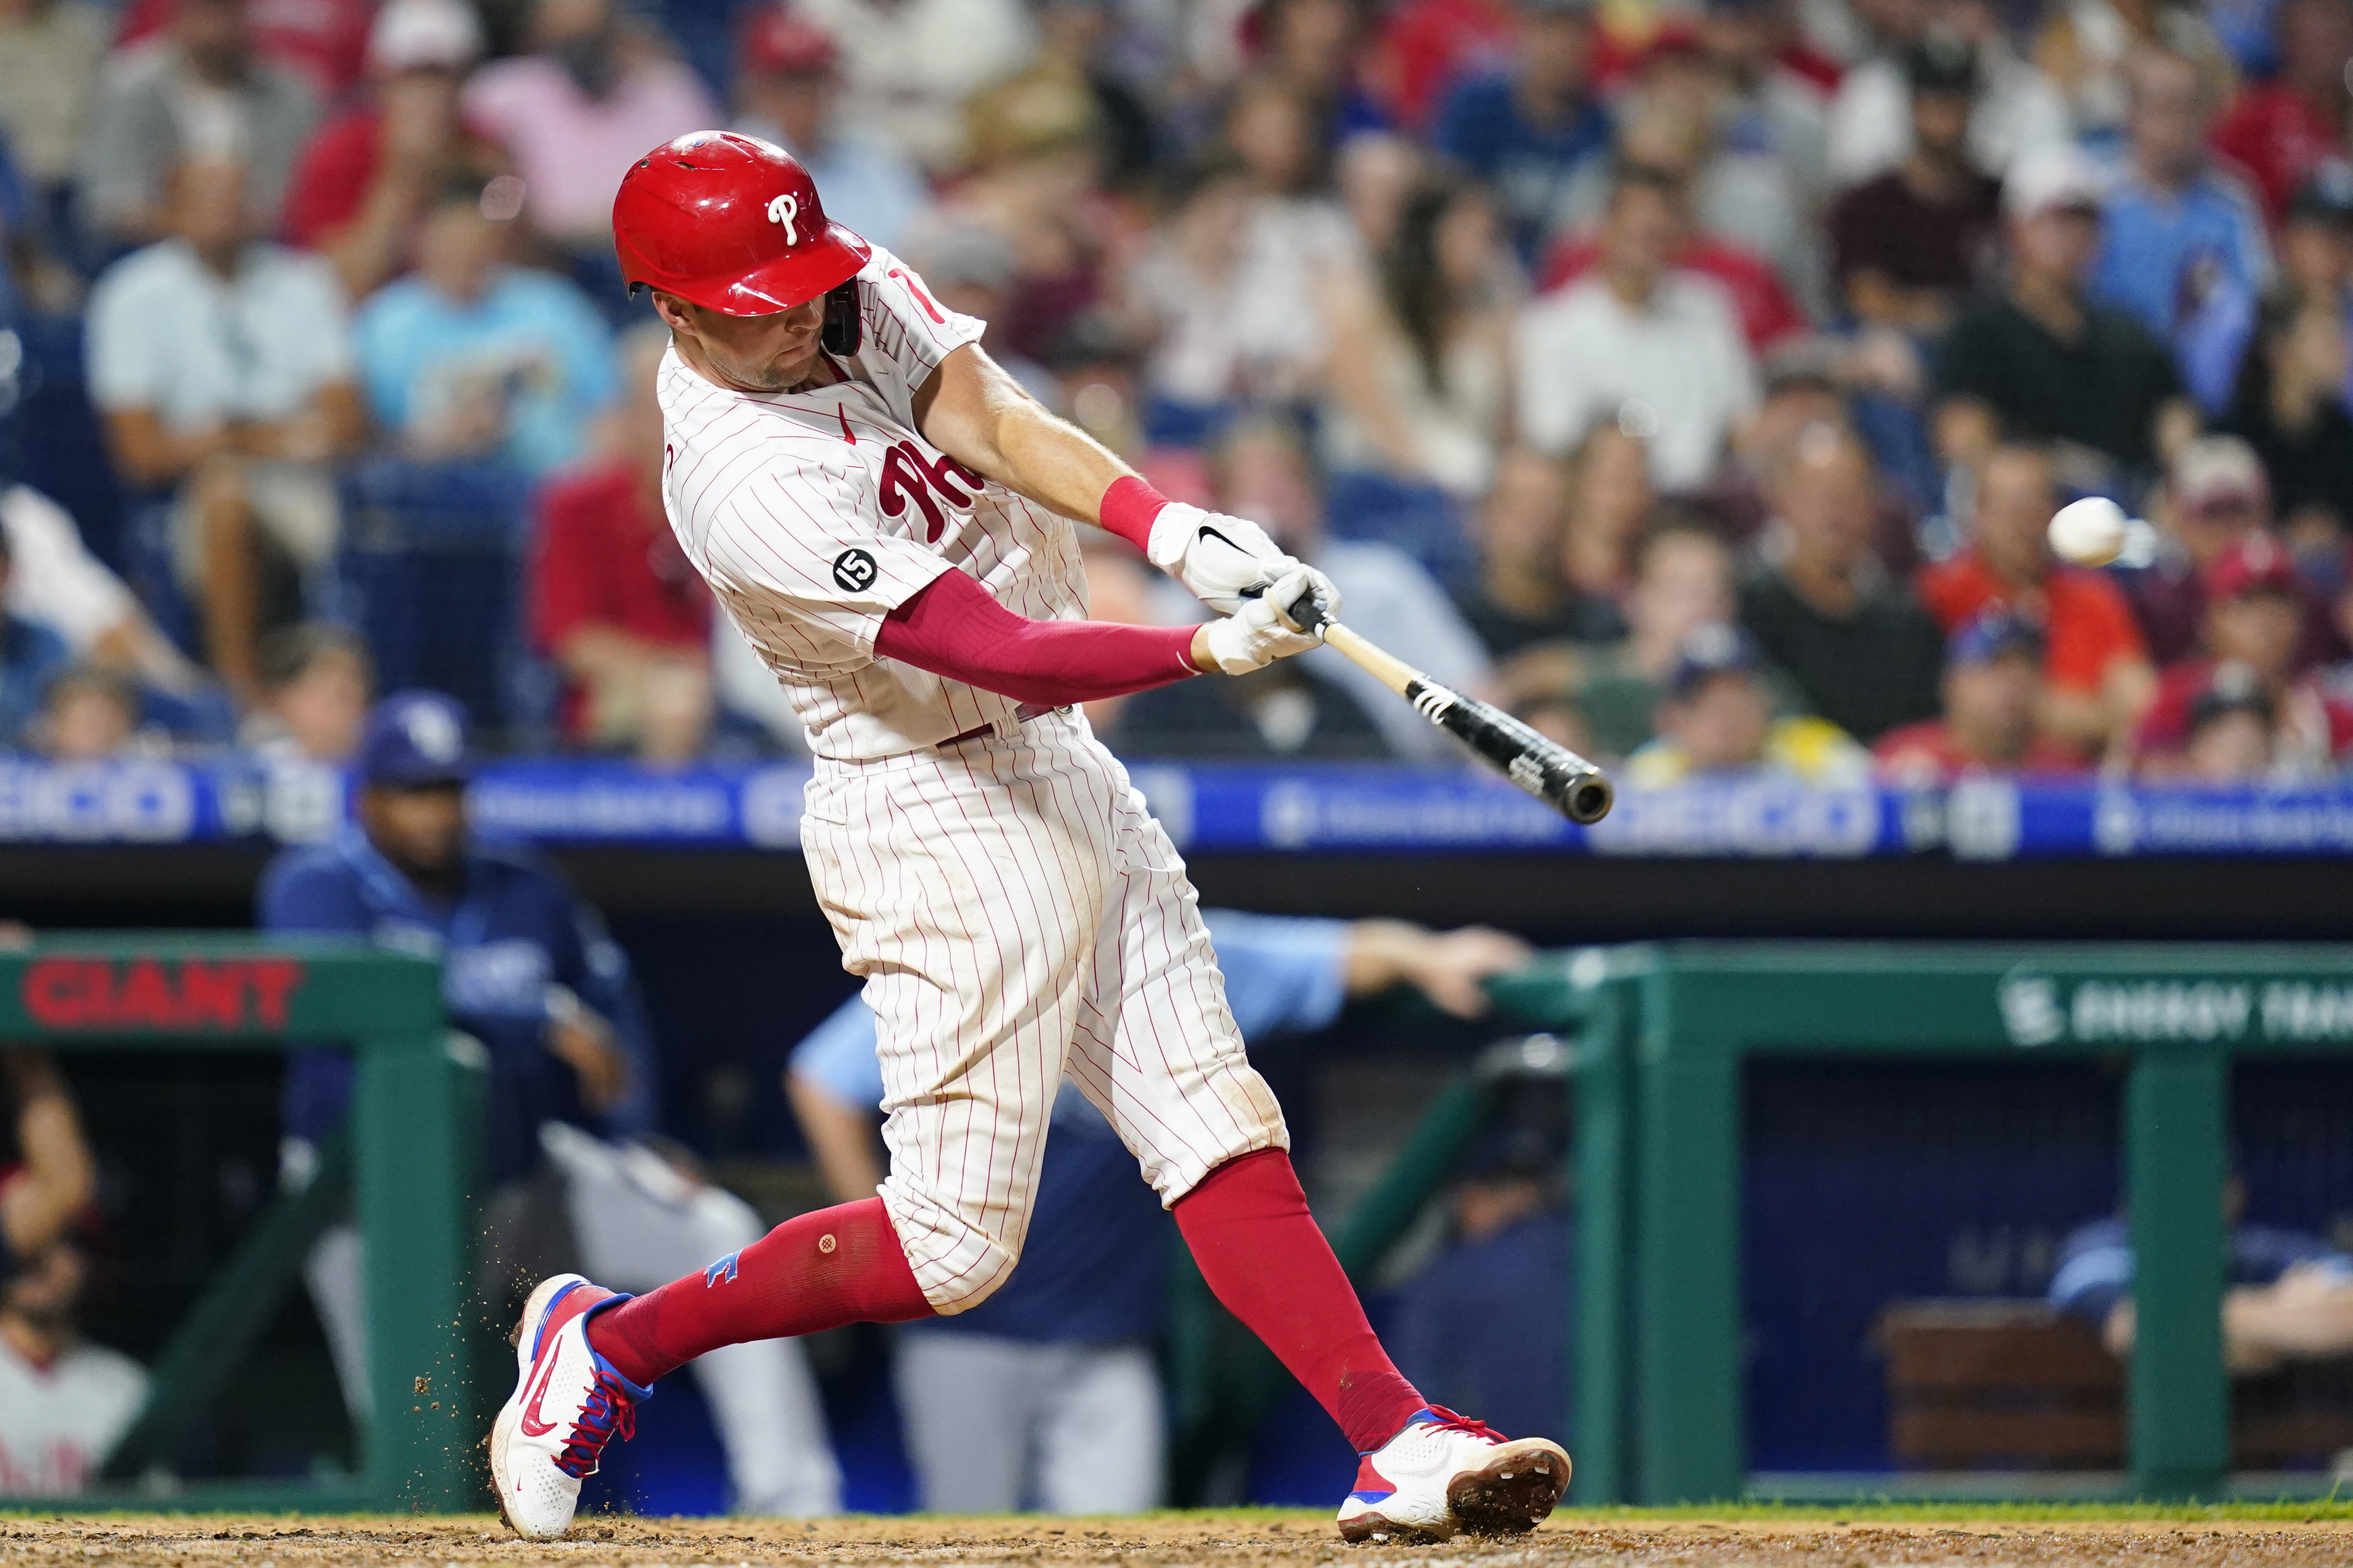 Phillies taking it slow with Rhys Hoskins after offseason meniscus surgery  – NBC Sports Philadelphia